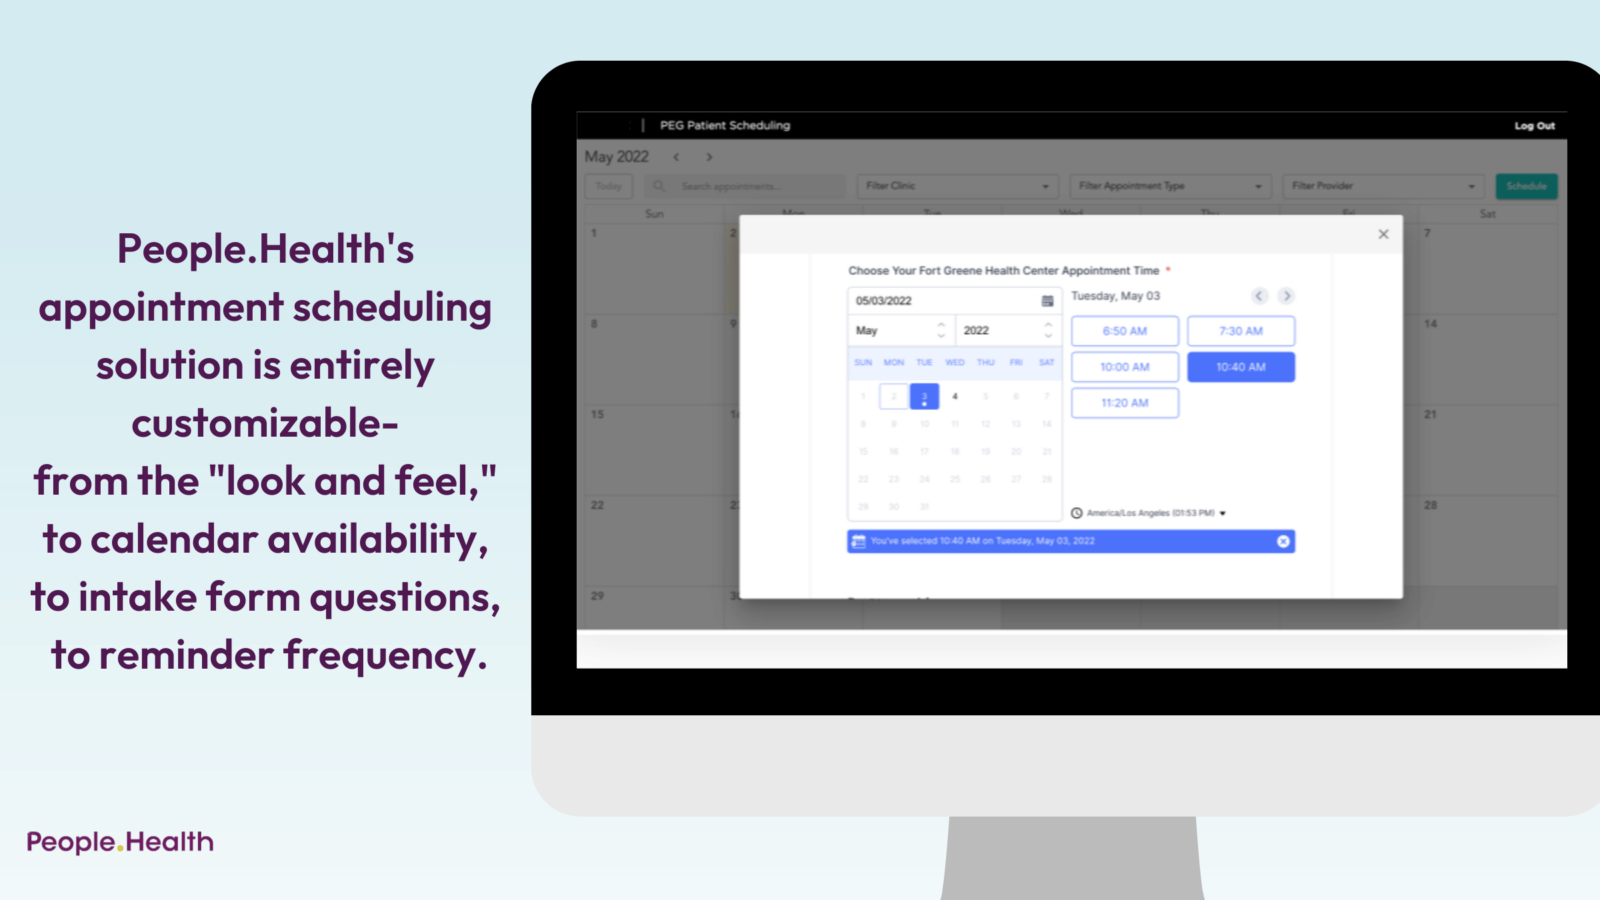 People.Health's appointment scheduling solution is entirely customizable.